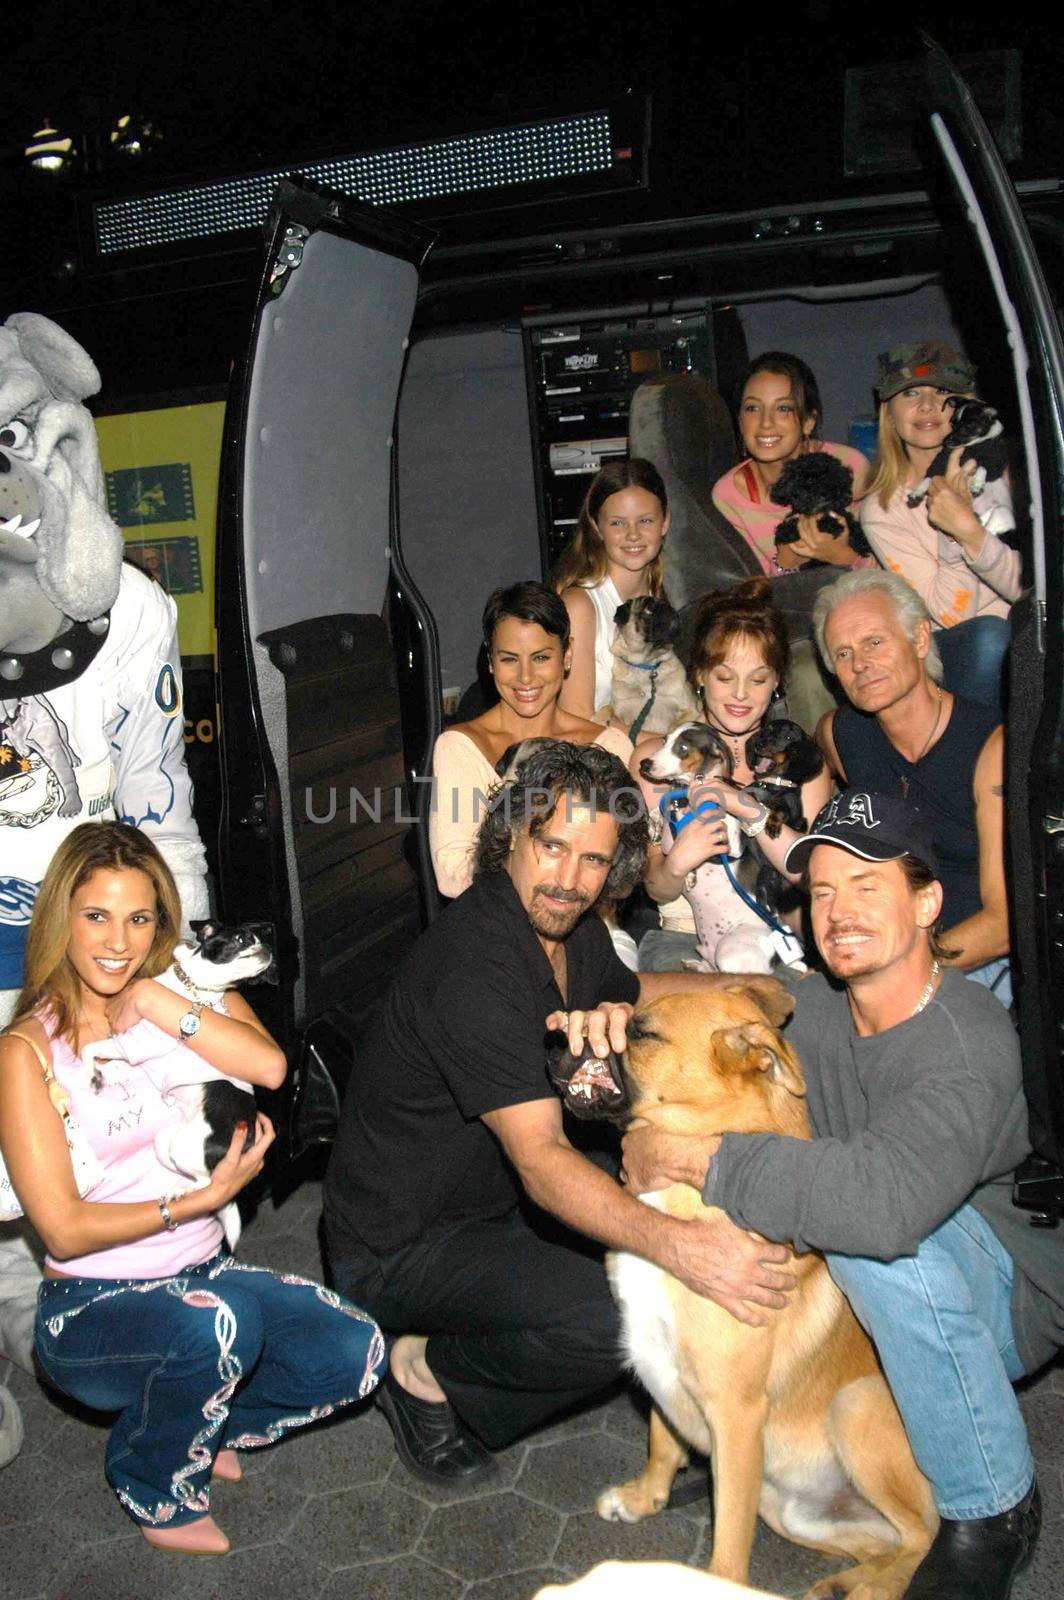 Celebrity Guests with new Animal News Van at the Last Chance For Animals Press Conference, Third Street Promenade, Santa Monica, Calif., 08-26-03